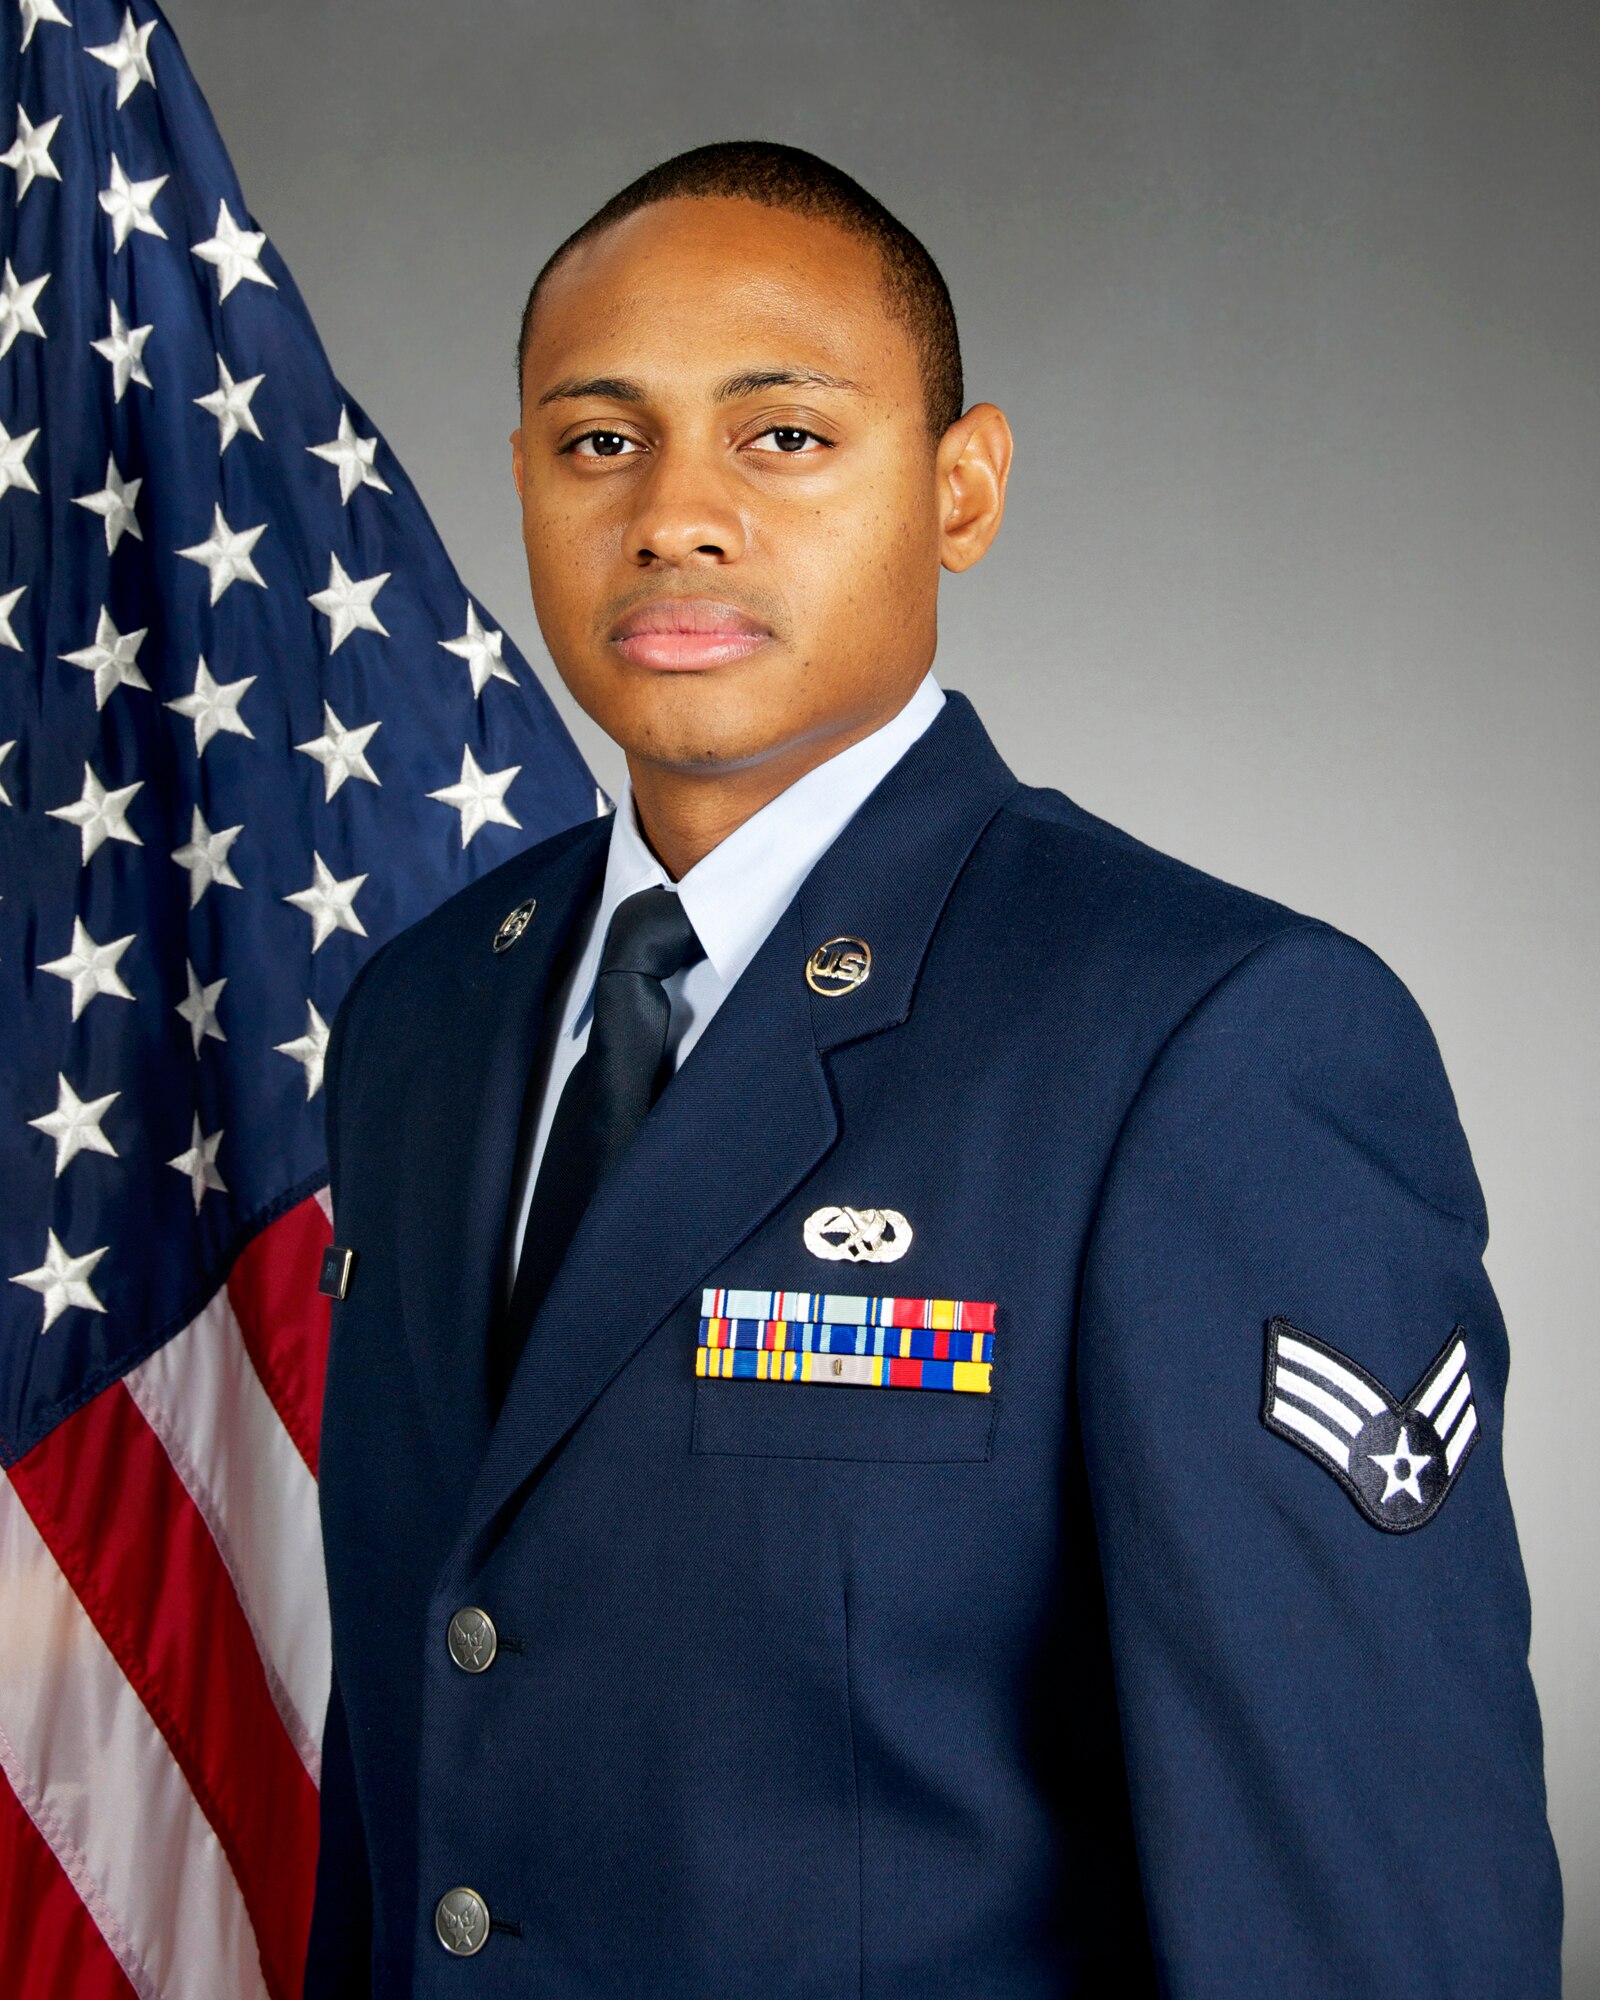 Senior Airman Tyshawn G. Jenkins was chosen as the Airman of the Year by the 108th Wing. The 108th, which is assigned to the New Jersey Air National Guard, is located at Joint Base McGuire-Dix-Lakehurst, N.J. (U.S. Air National Guard photo by Airman 1st Class Julia Pyun/Released)